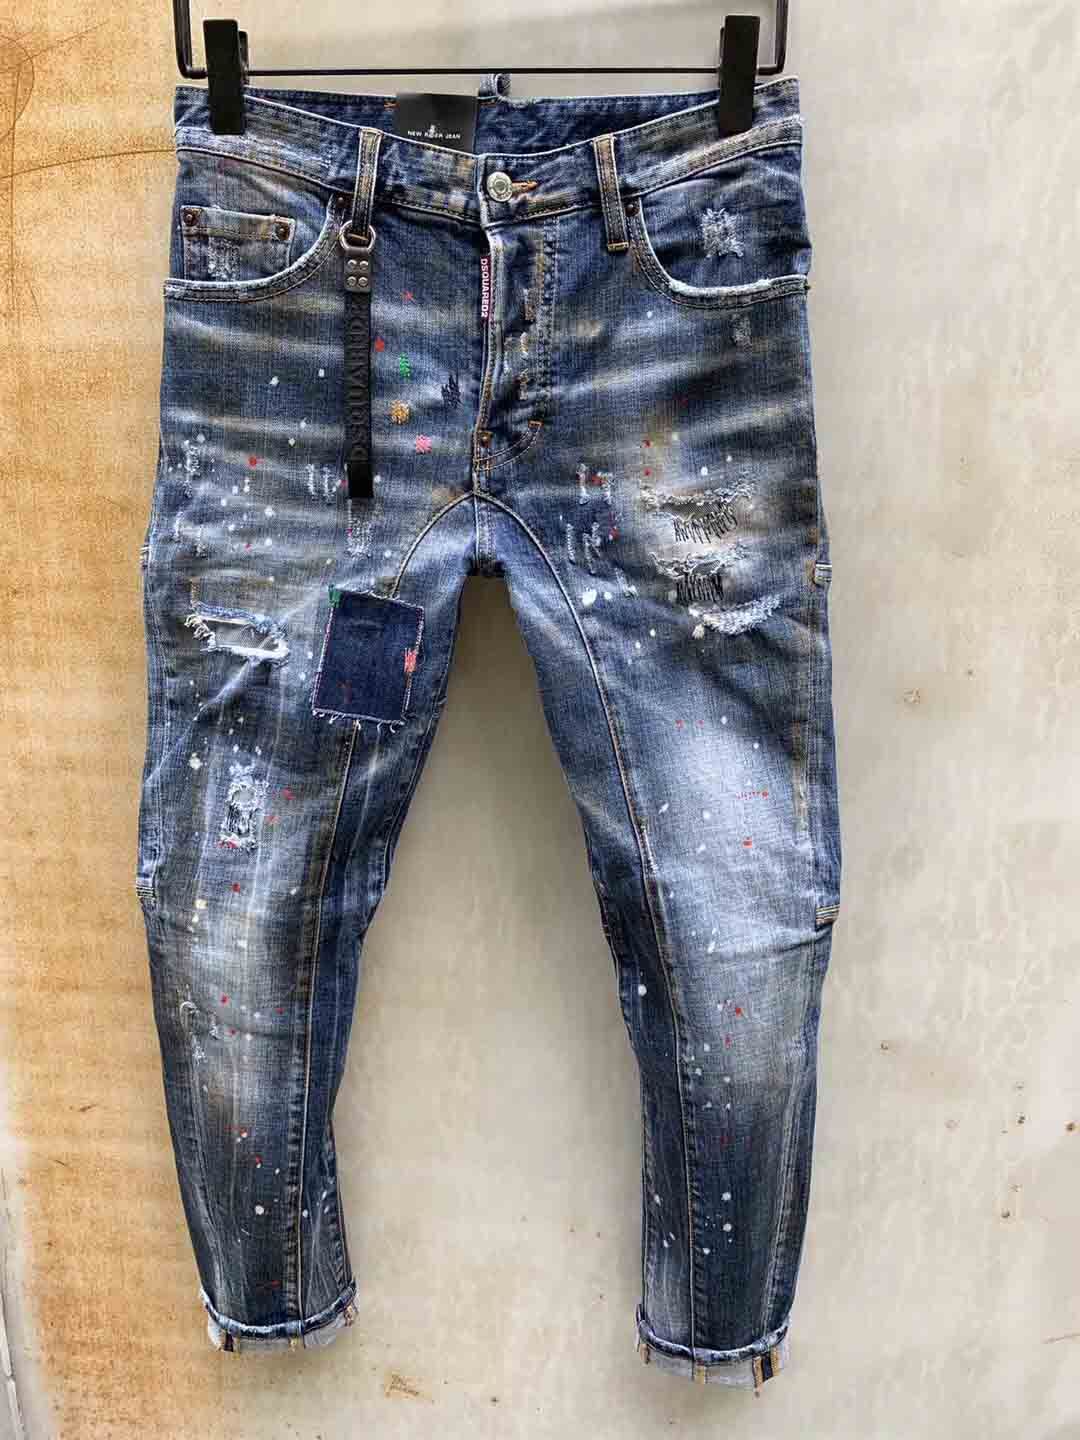 dhgate dsquared jeans